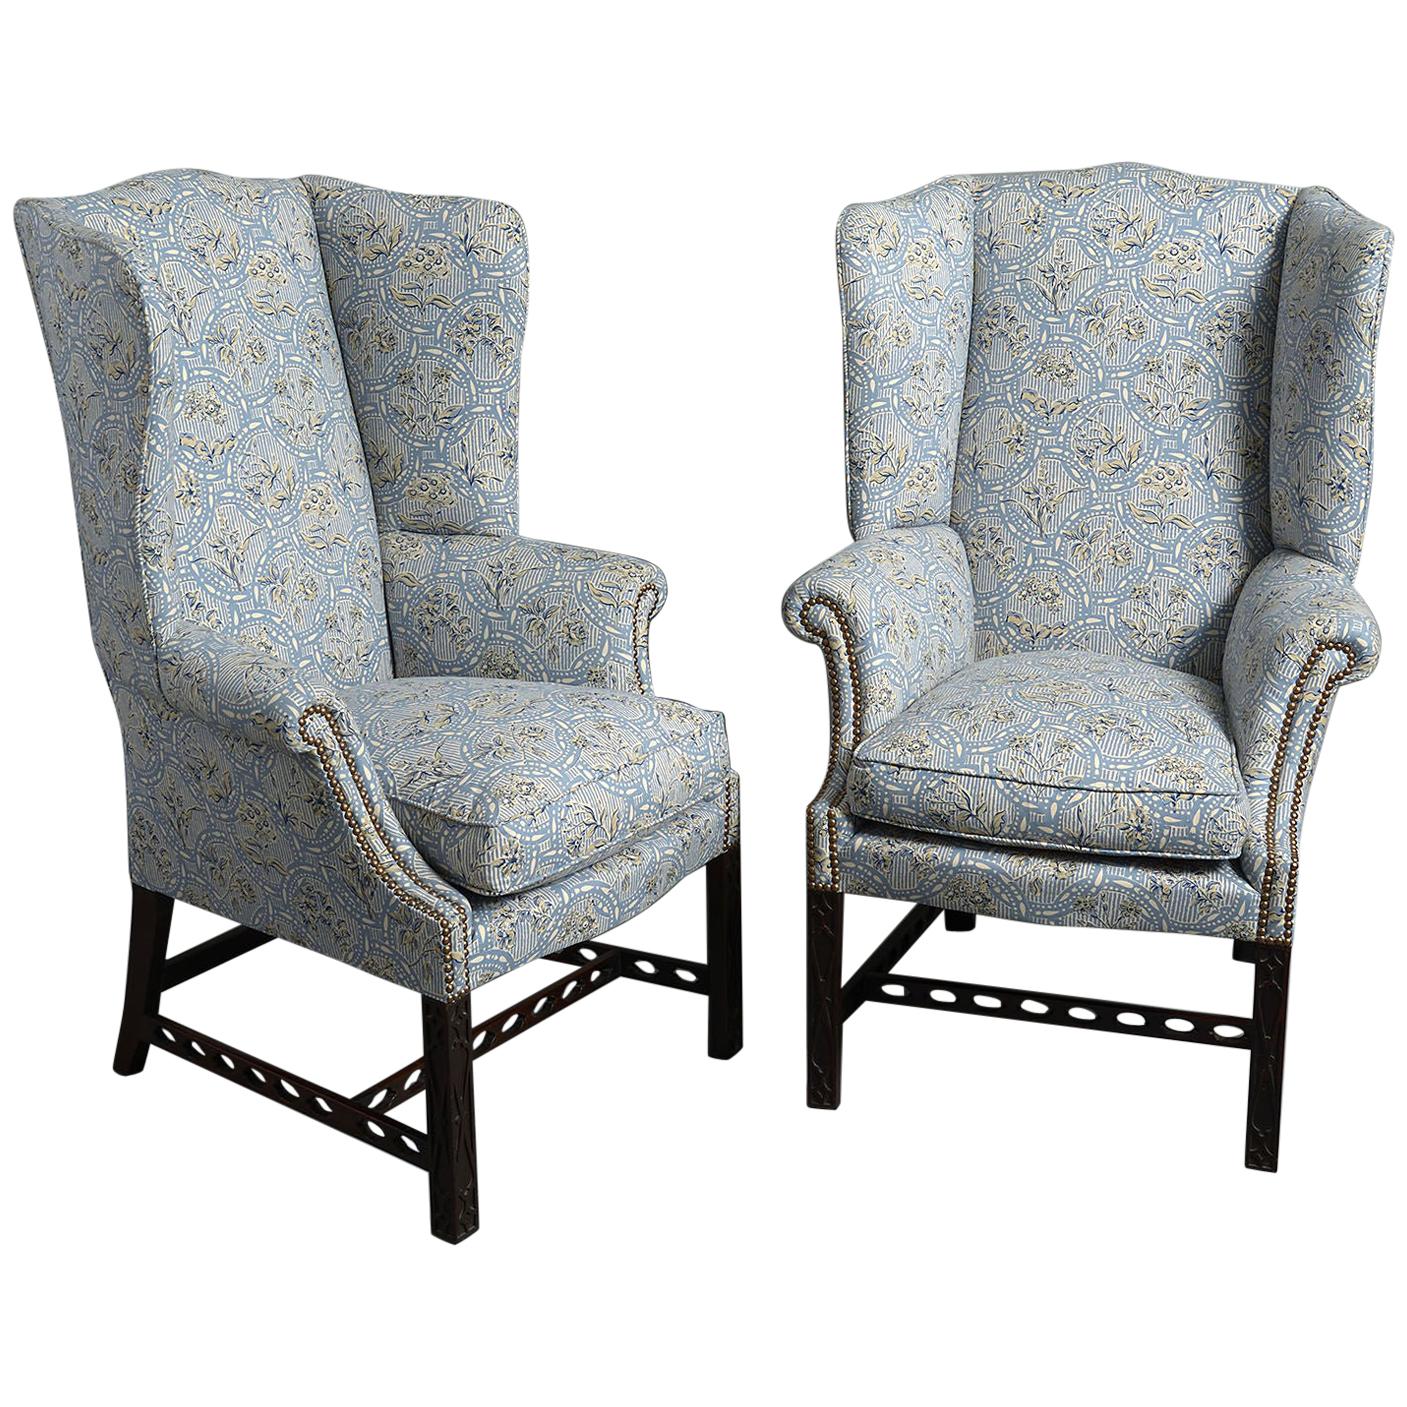 Pair of Mahogany "Gothic Chippendale" Wing Armchairs